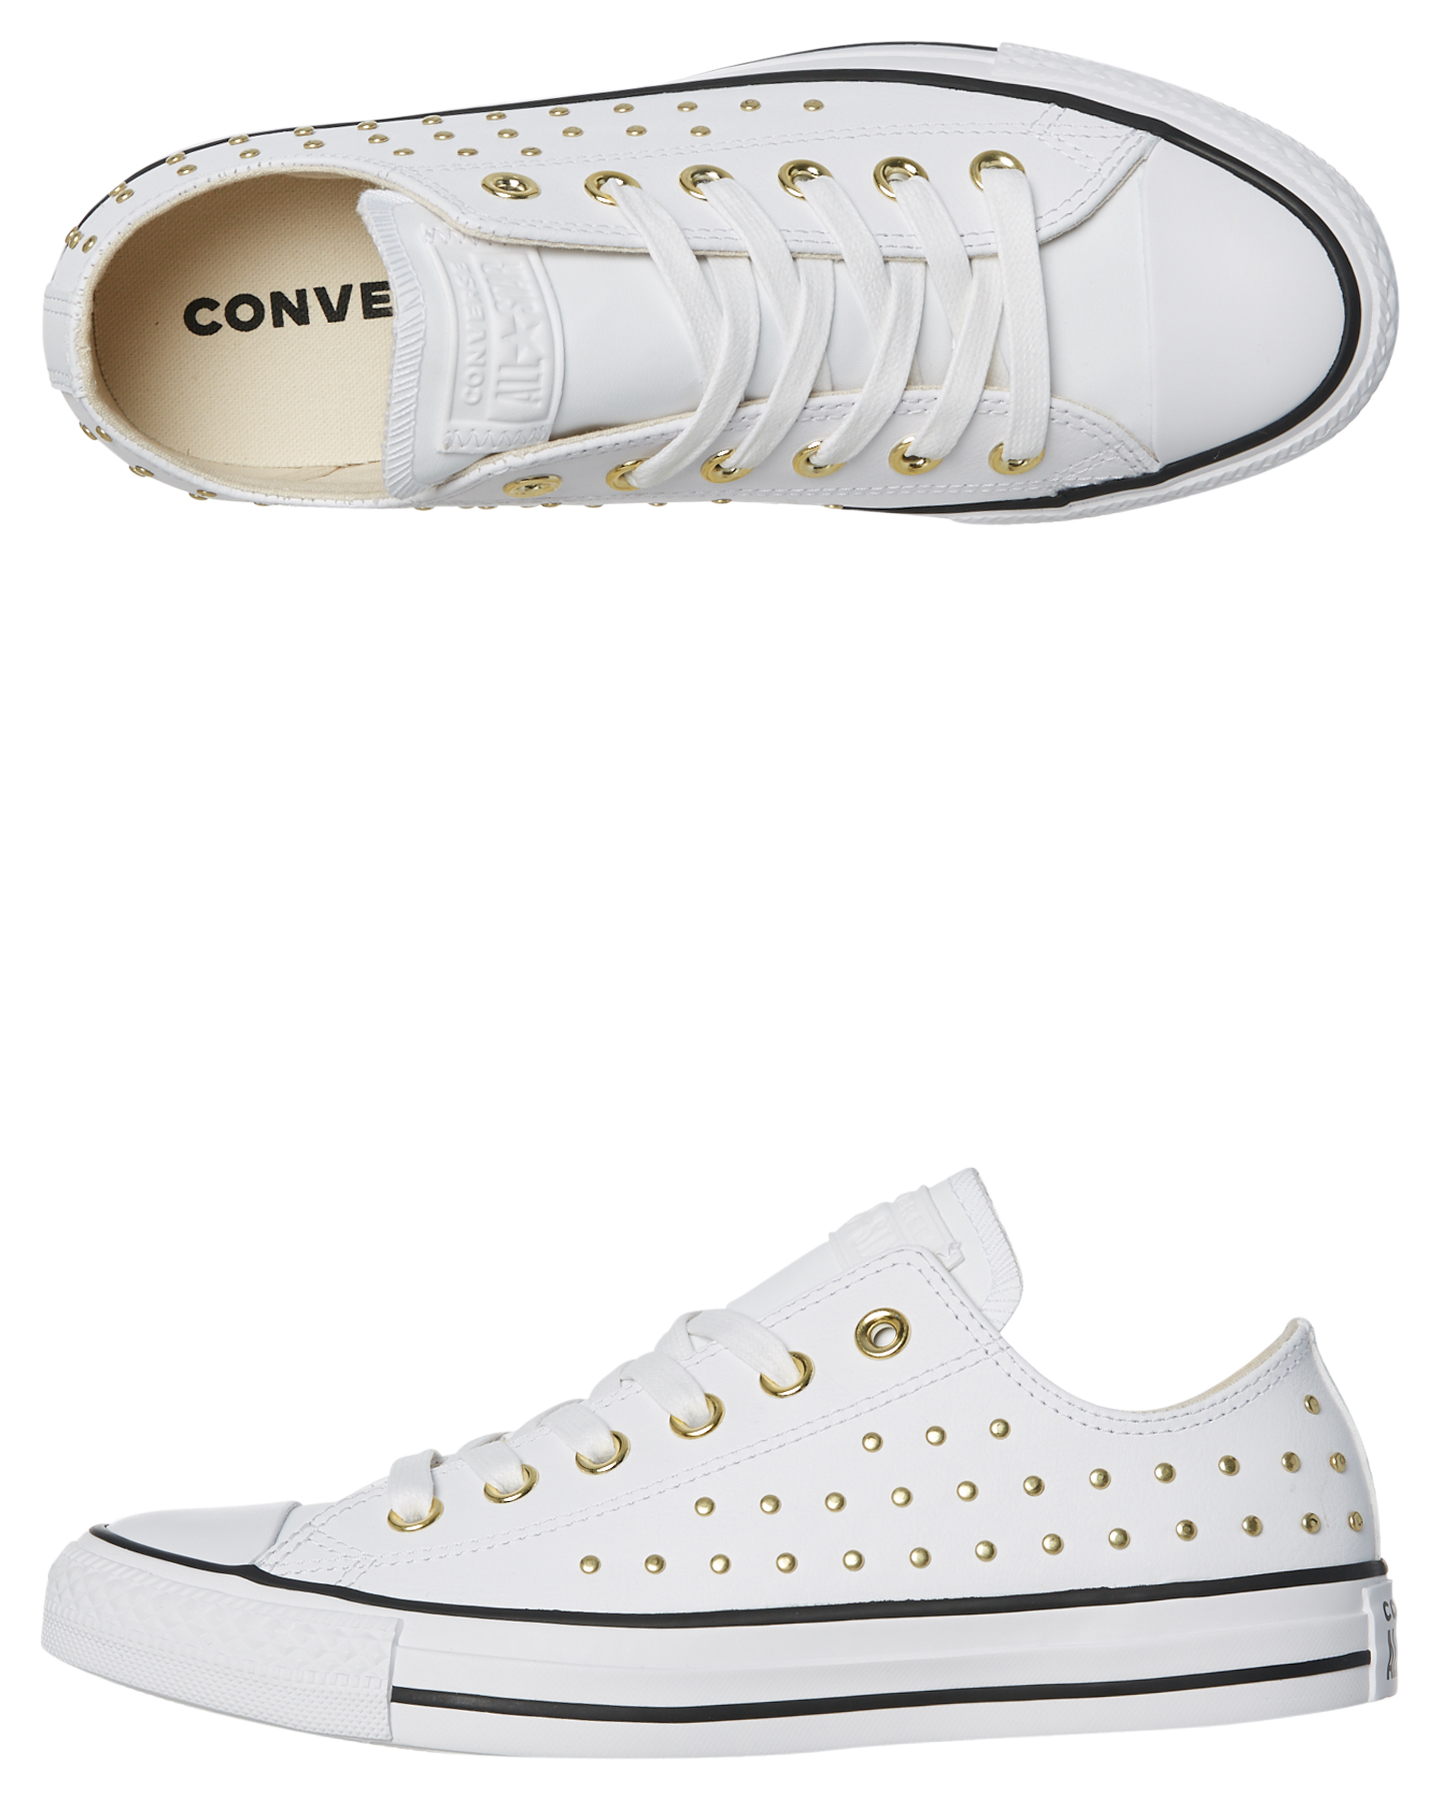 converse all star leather white womens